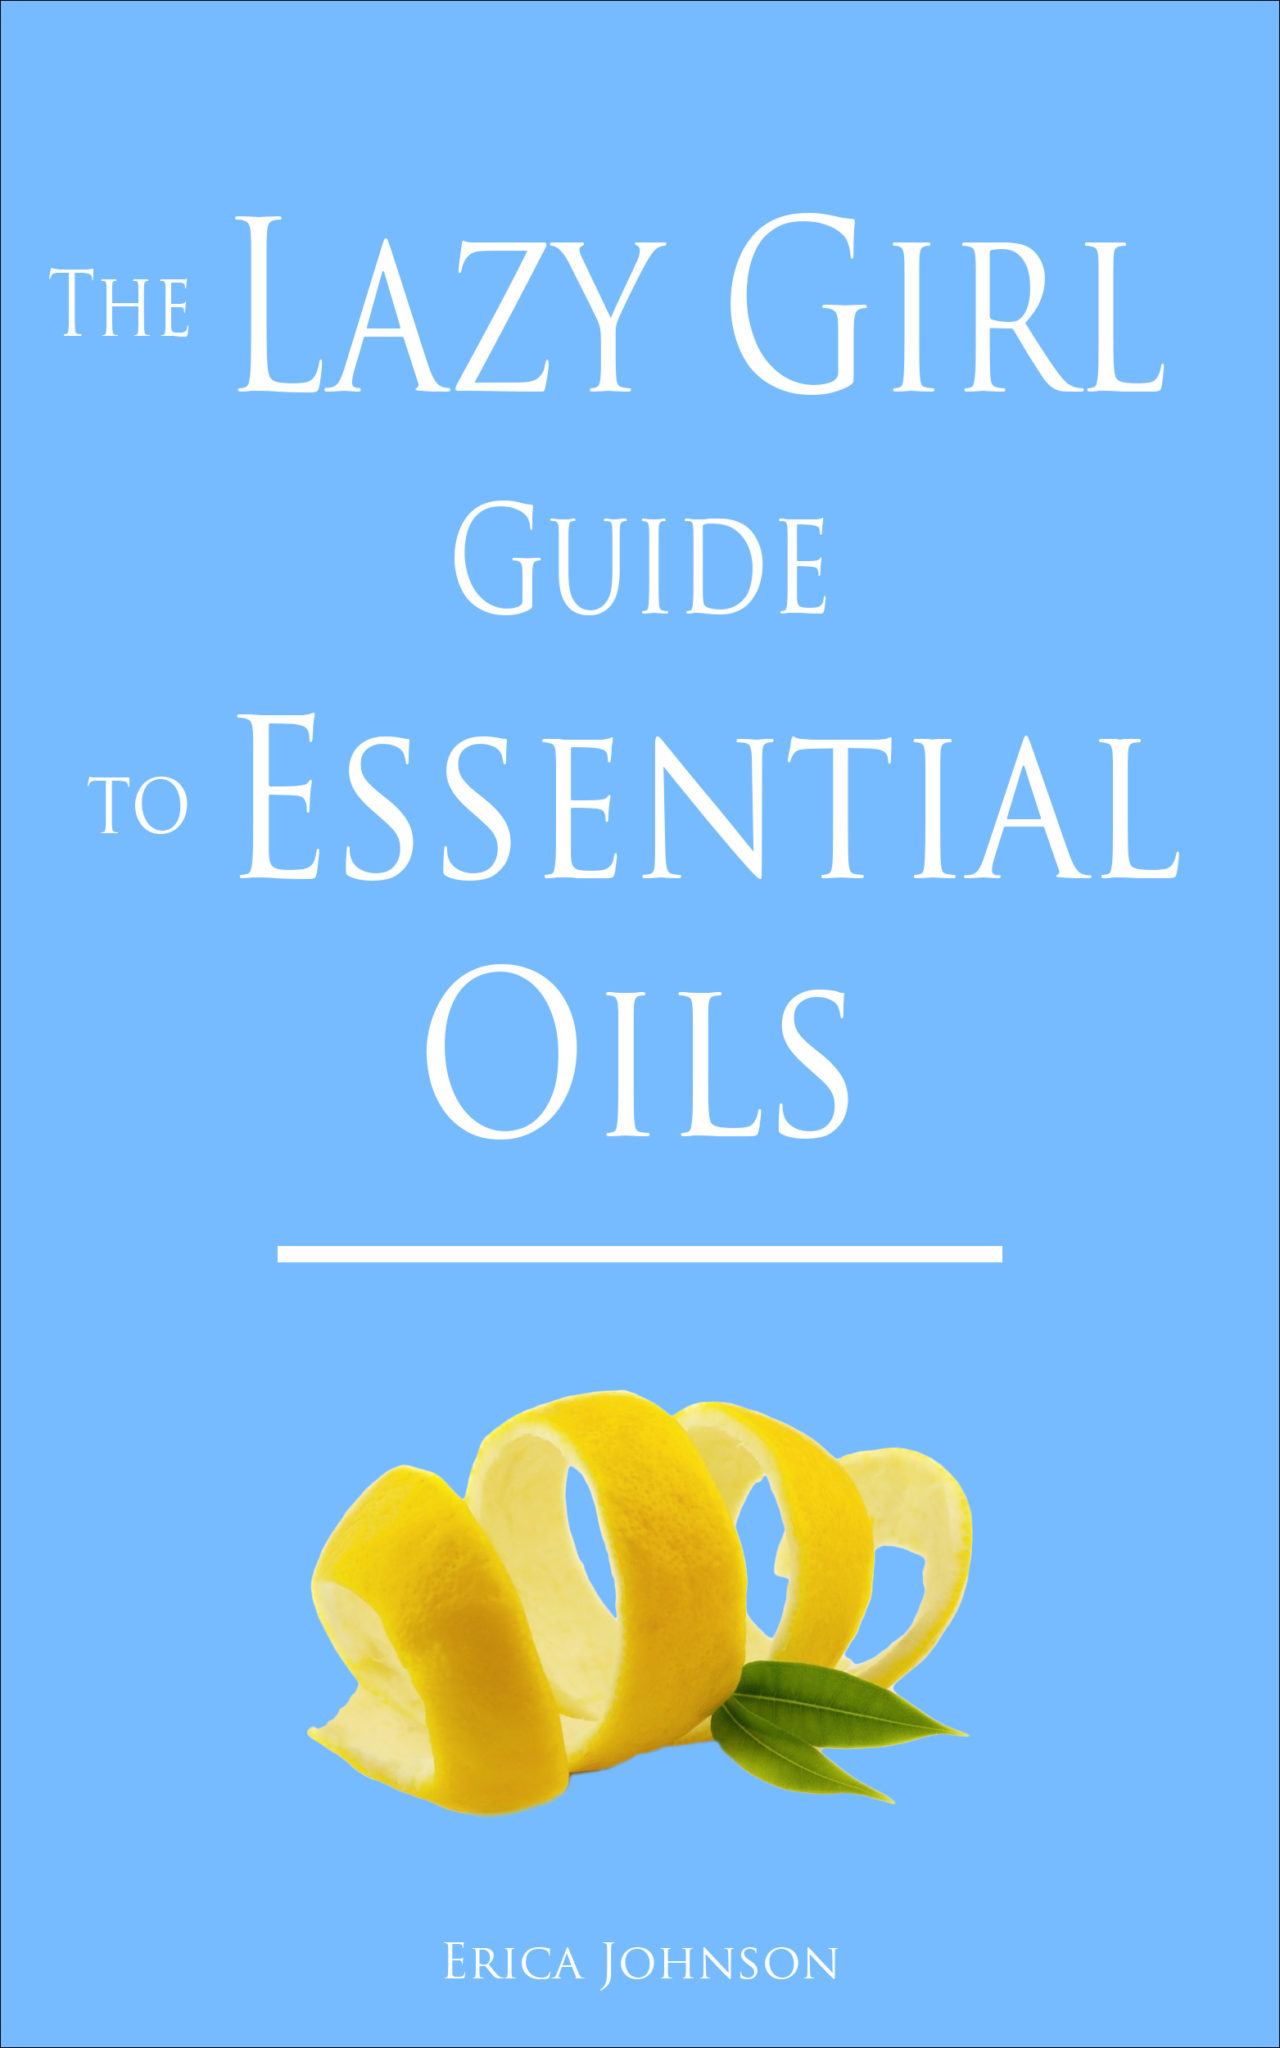 FREE: The Lazy Girl Guide to Essential Oils by Erica Johnson